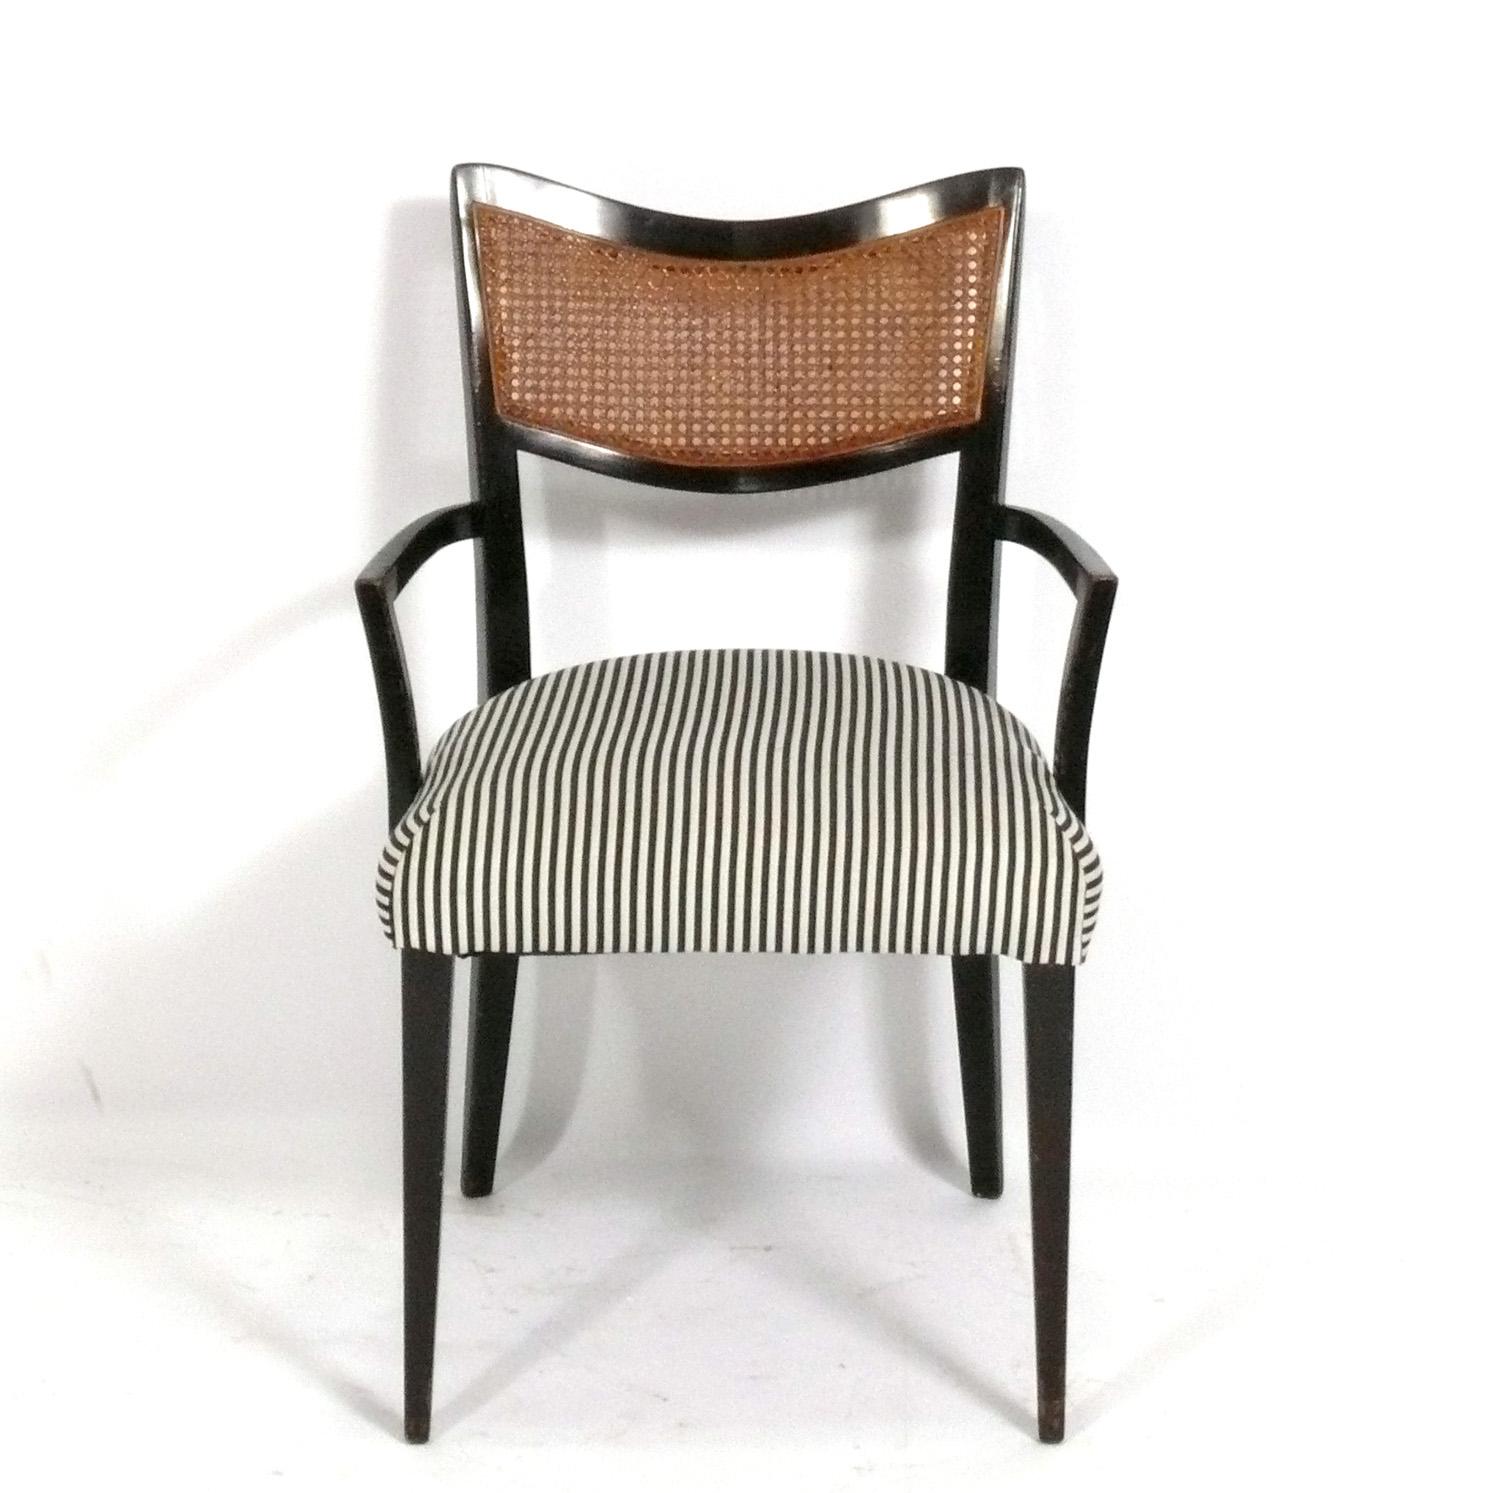 Set of six curvaceous dining chairs, designed by Harvey Probber, American, circa 1960s. These chairs are currently being refinished and reupholstered. They can be completed in your choice of finish color and in your fabric. Simply send us 5 yards of